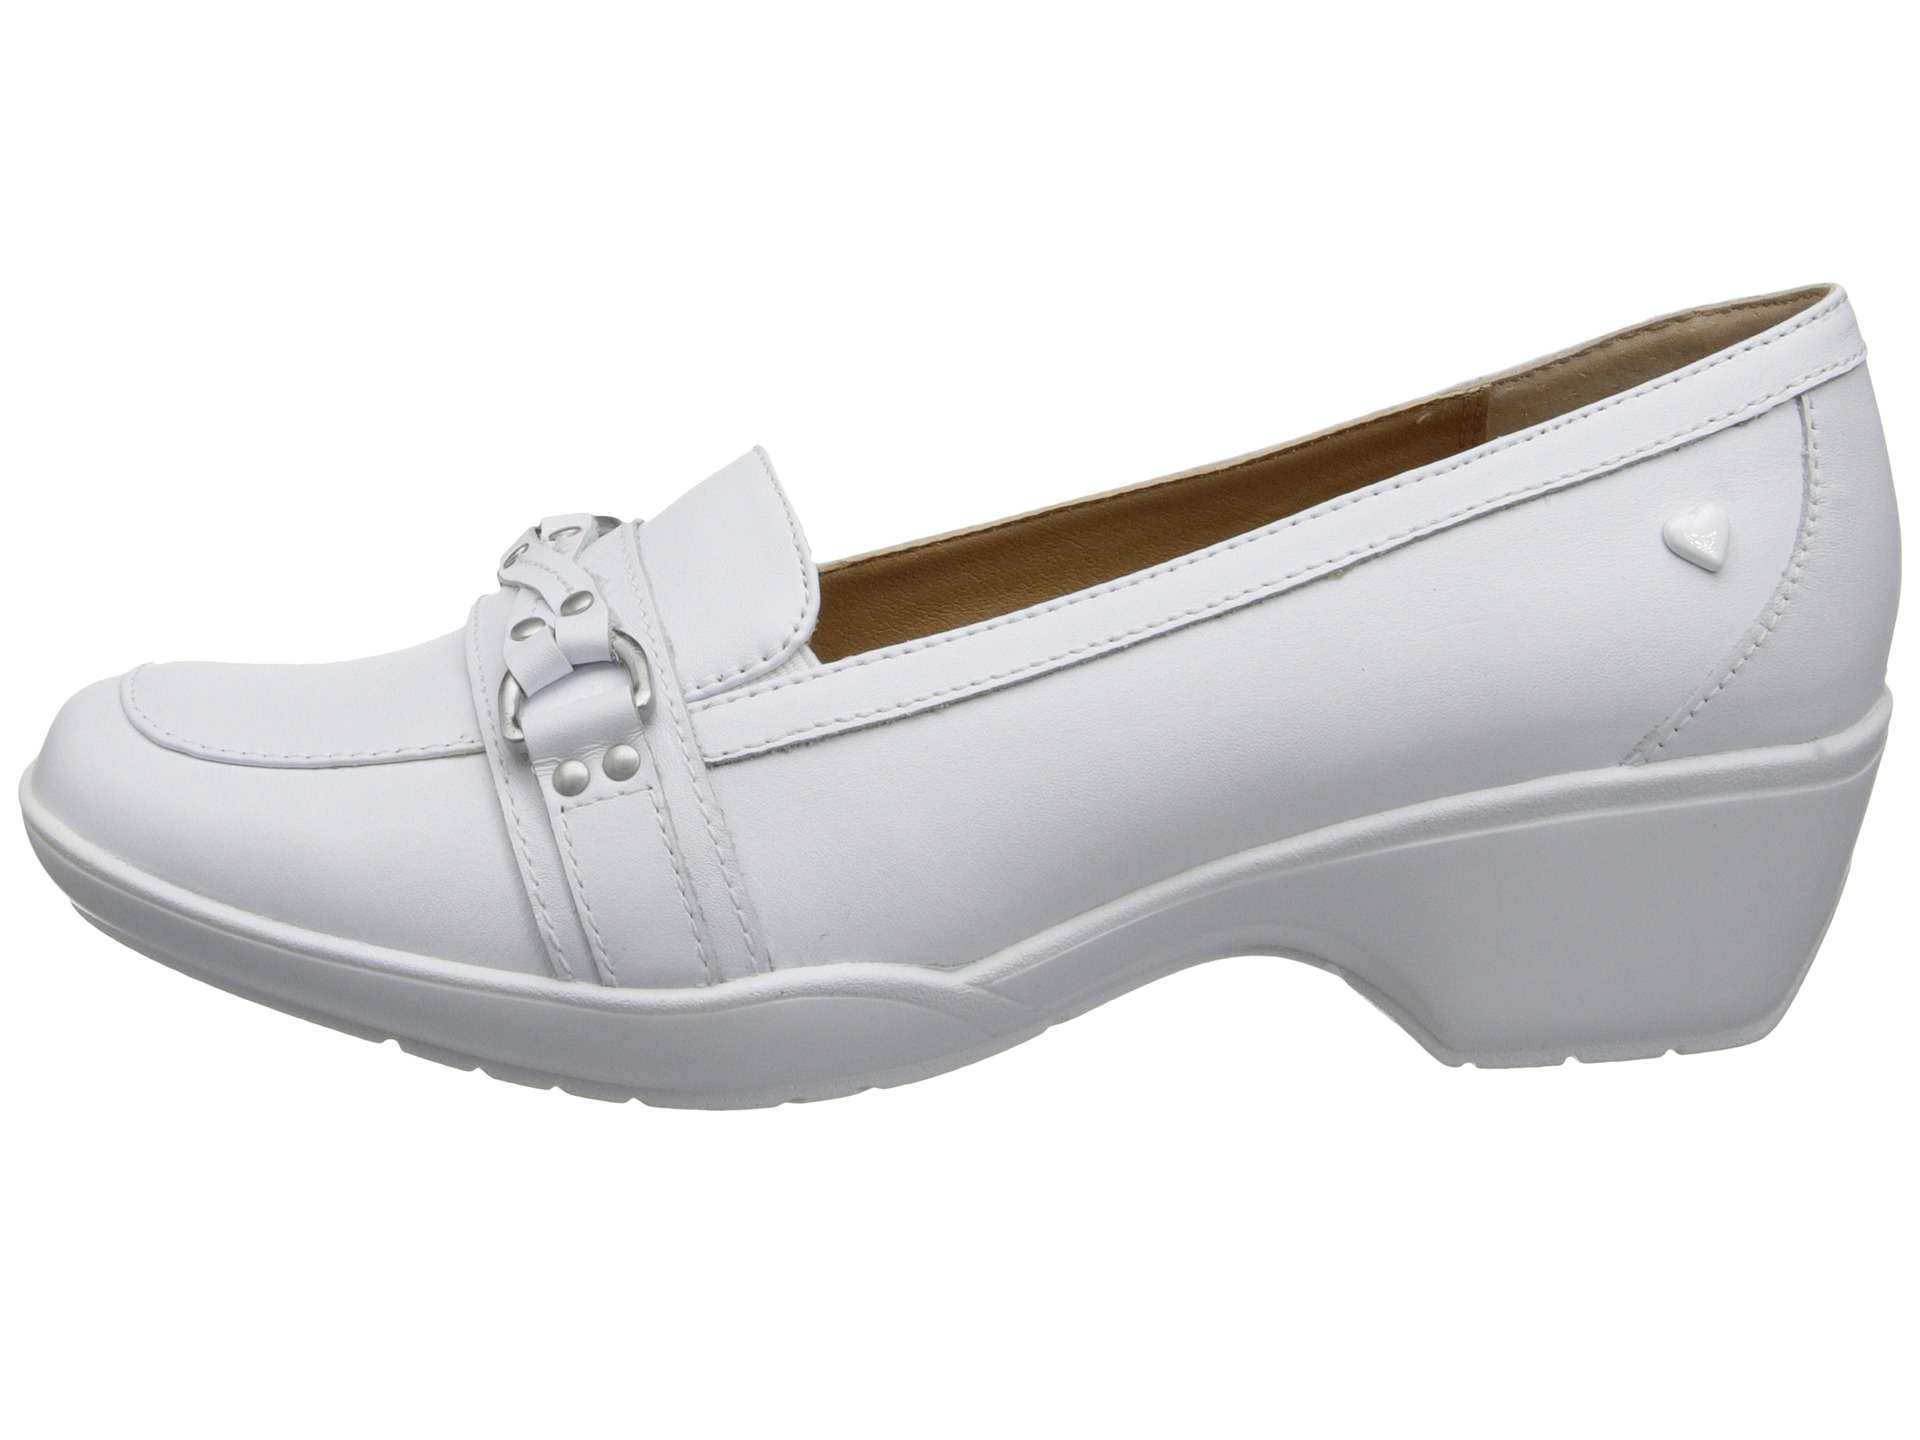 nursing shoes on clearance